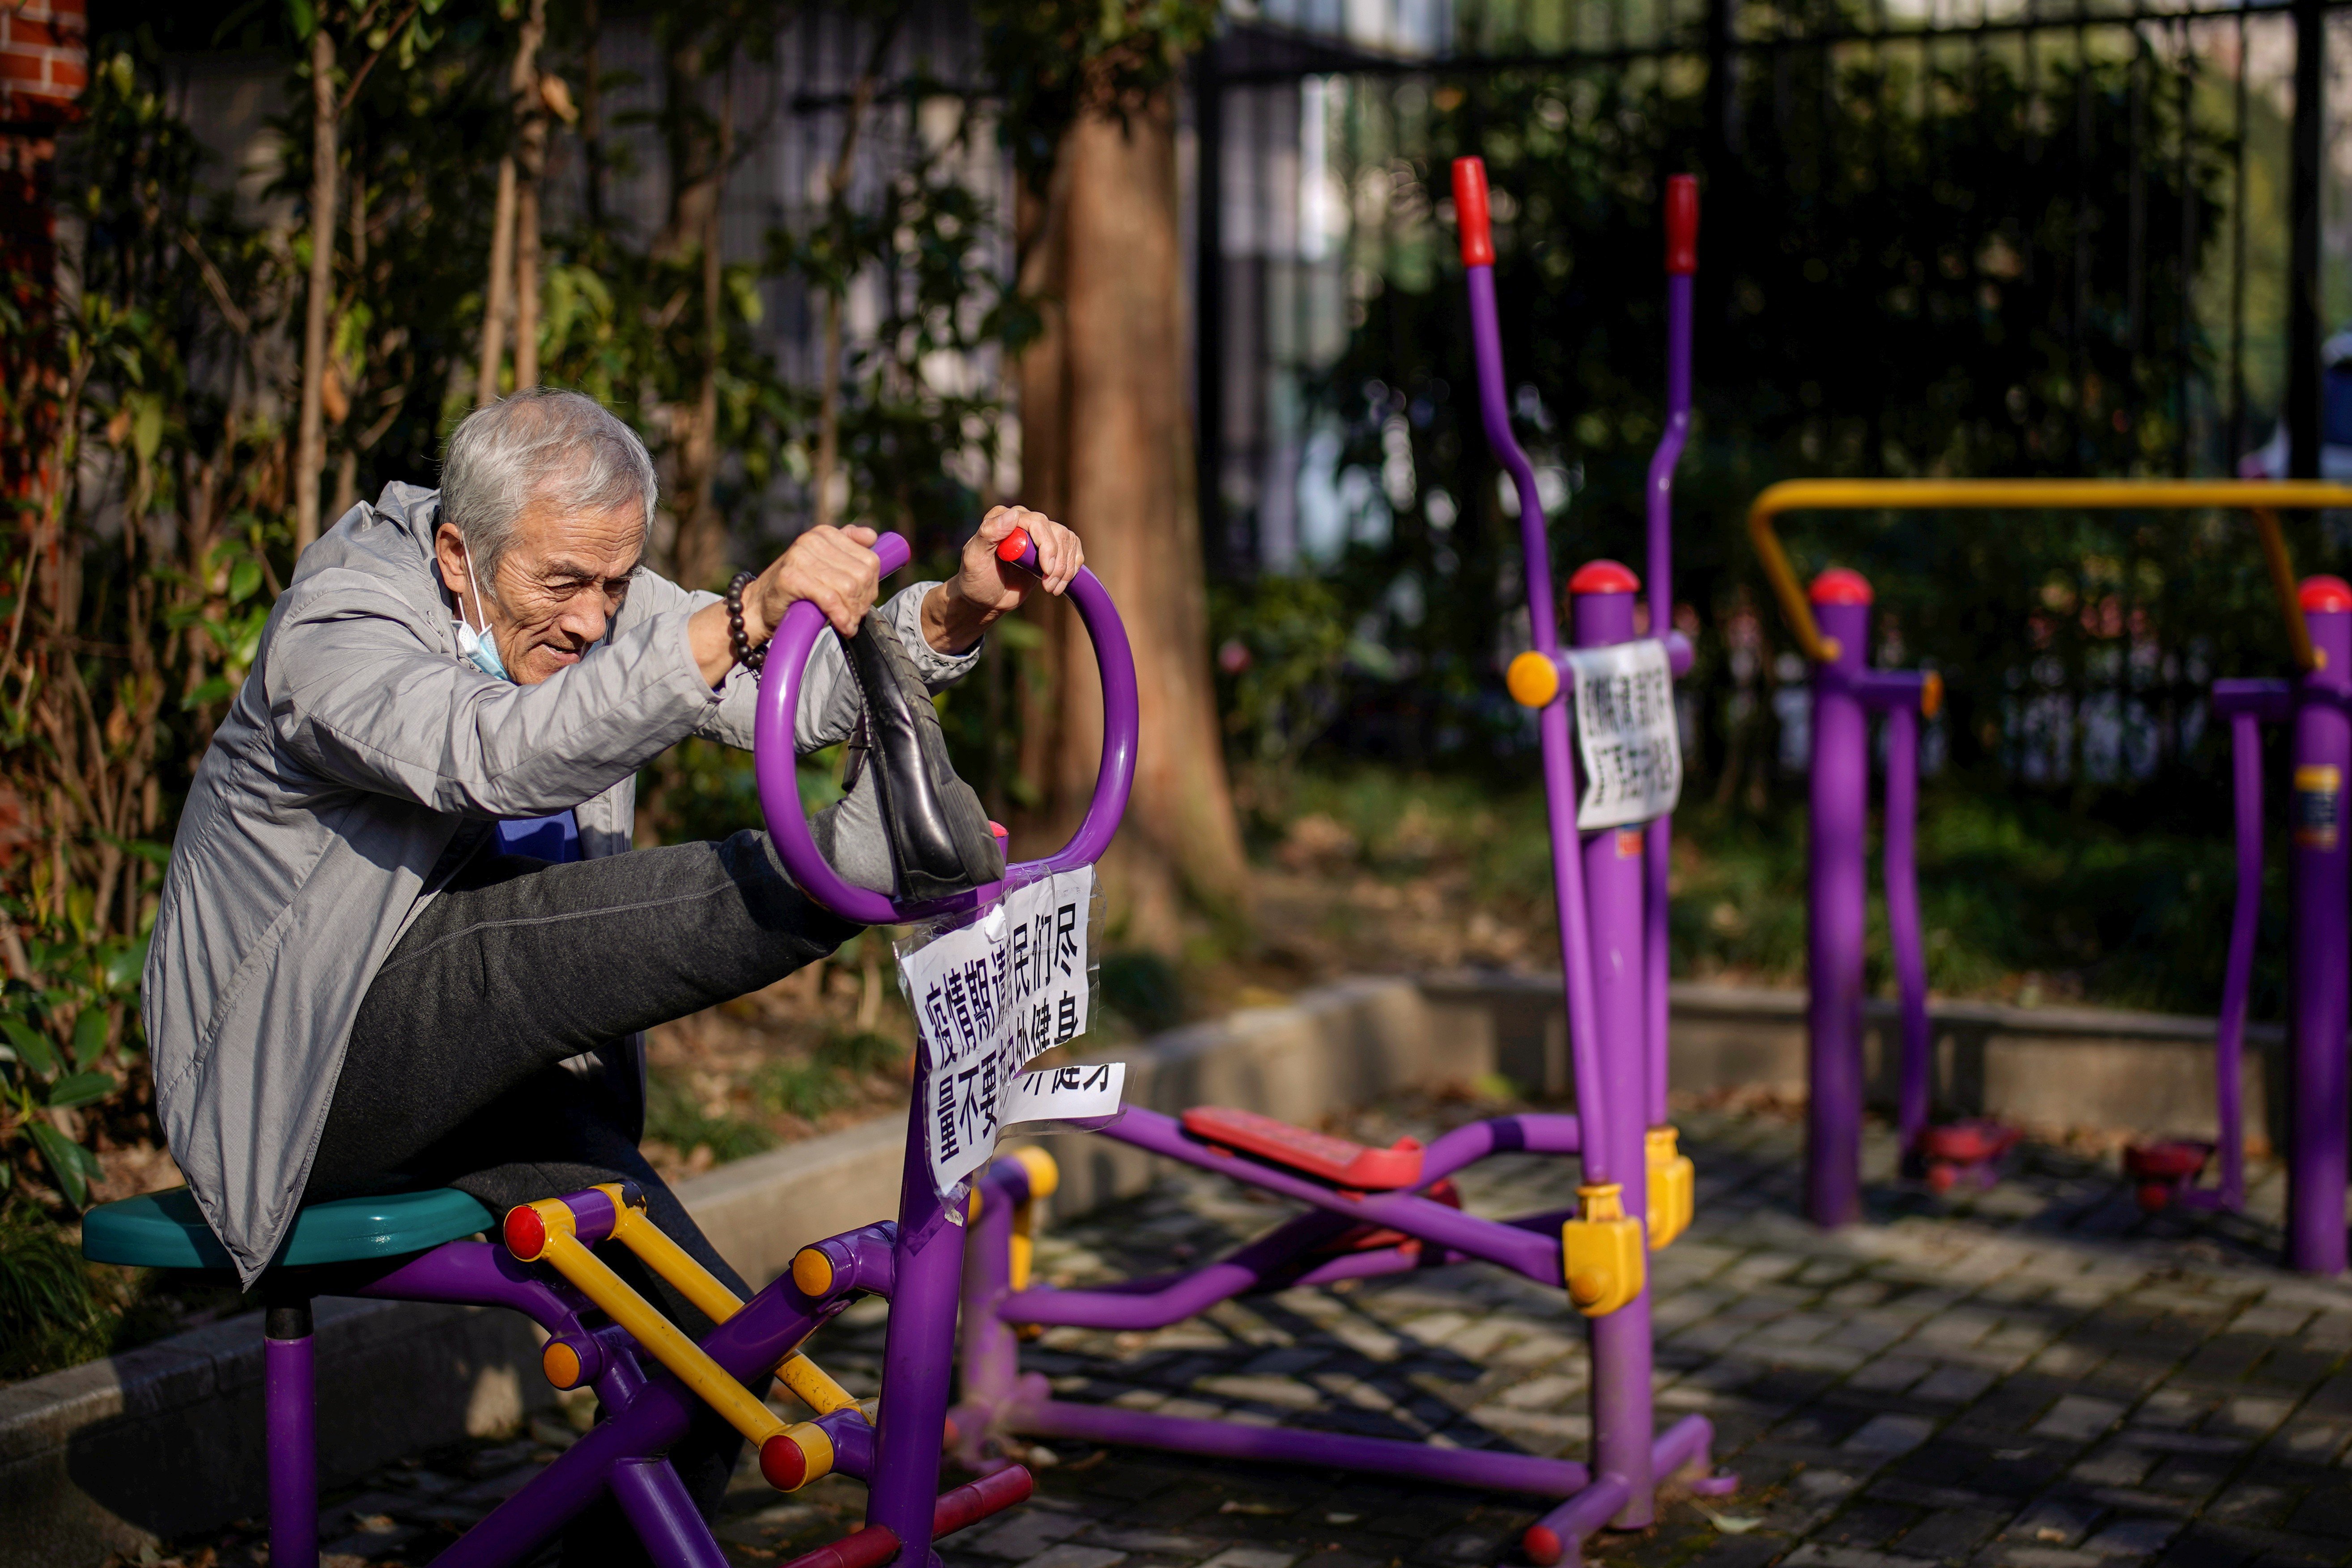 An elderly man stretches on a machine, with a sign advising residents to avoid exercising outdoors during the coronavirus outbreak, at a park in Shanghai on March 12. Photo: Reuters